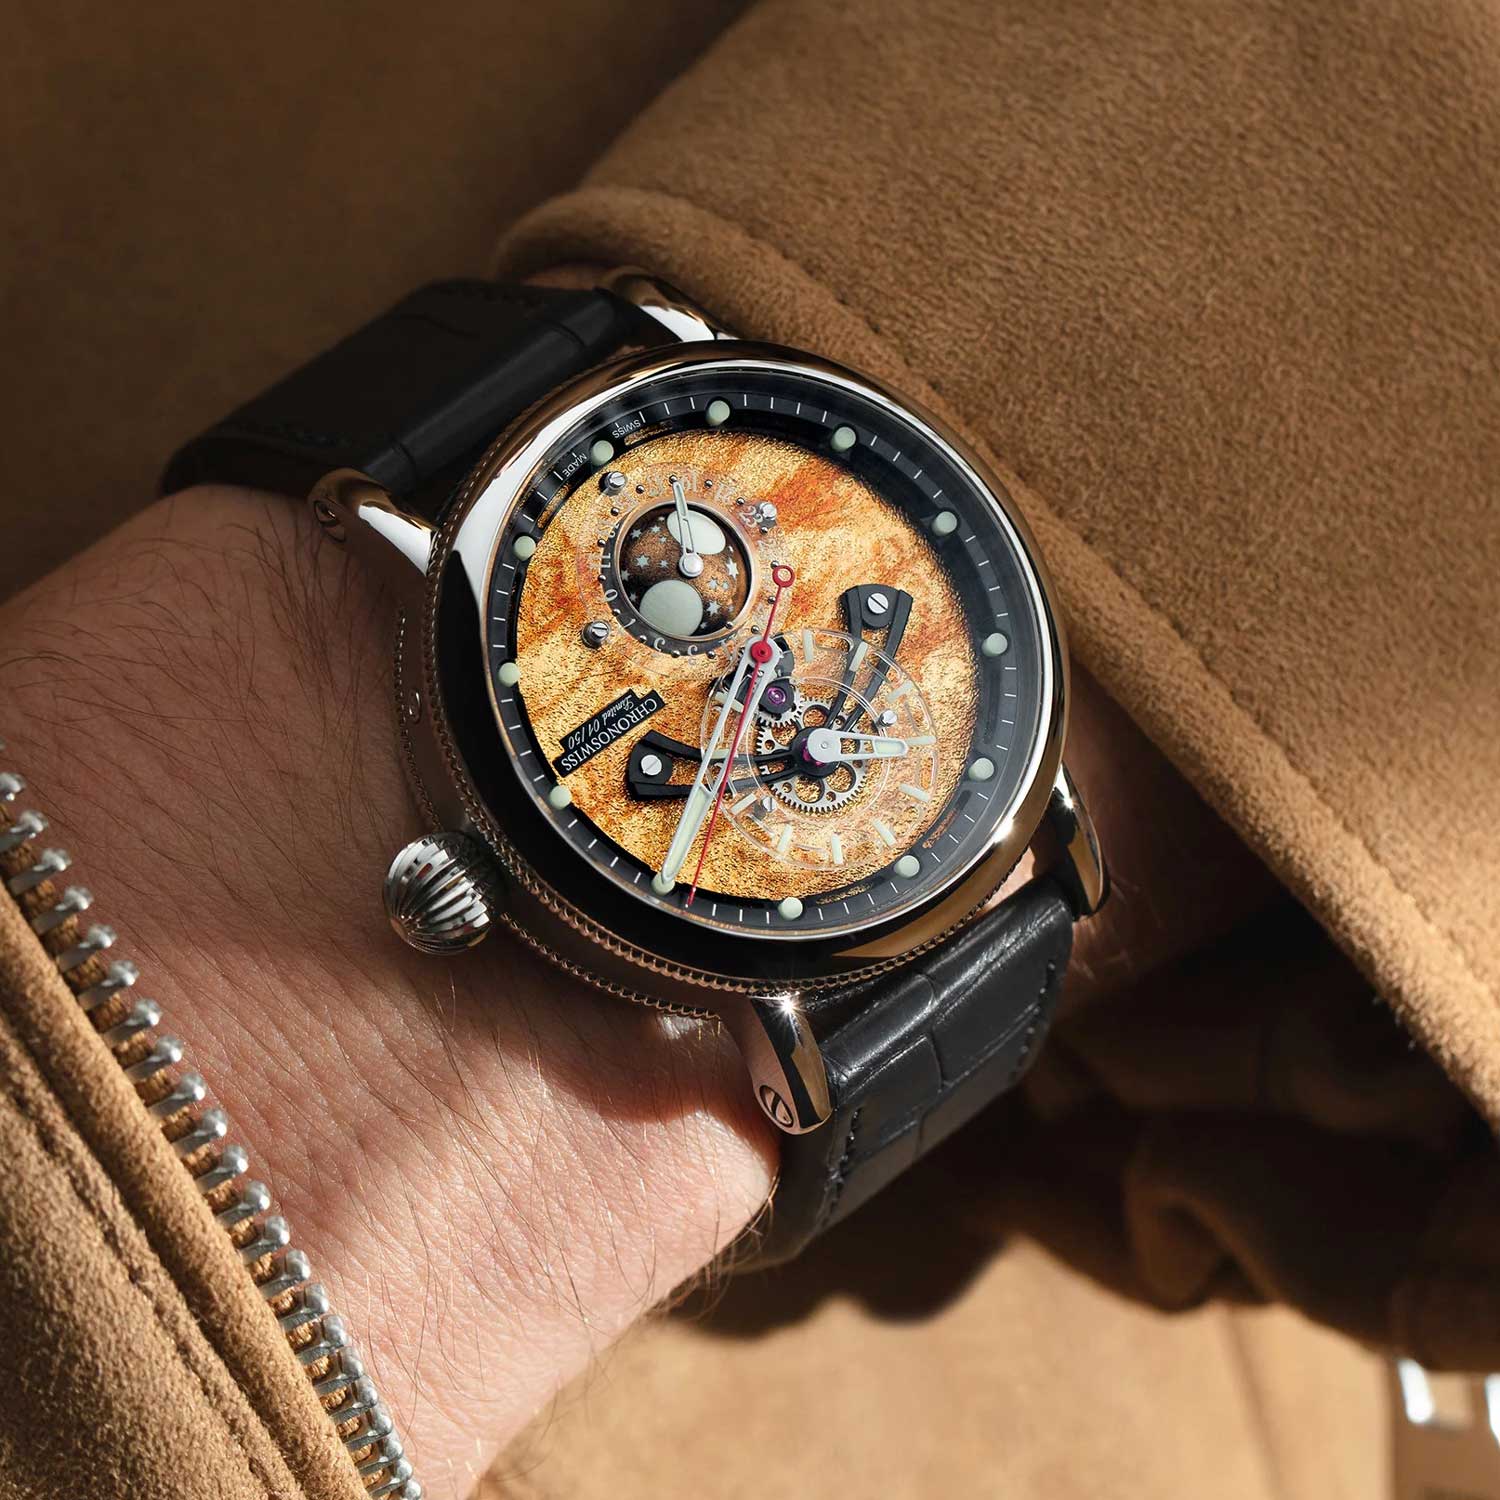 Featuring a gold-toned, nano-printed dial, the Space Timer Jupiter is a remarkable facsimile of the Solar System’s largest planet